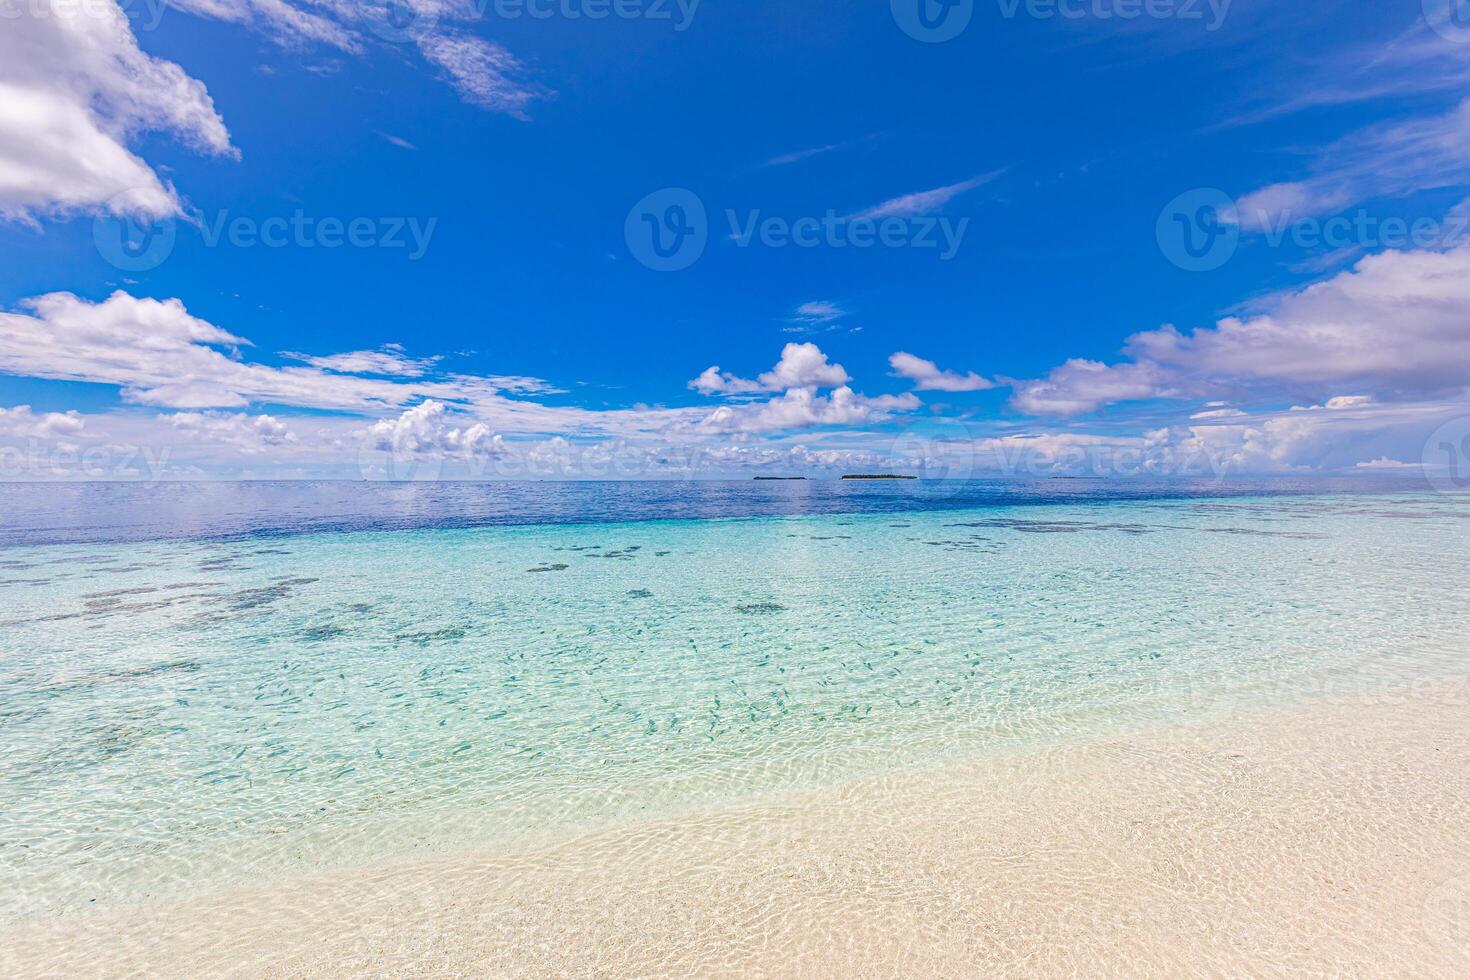 Tropical beach view. Calm and relaxing empty beach scene, blue sky and white sand. Tranquil nature concept. Soft serene waves splashing, summer Mediterranean seaside landscape. Sunny peaceful coast photo